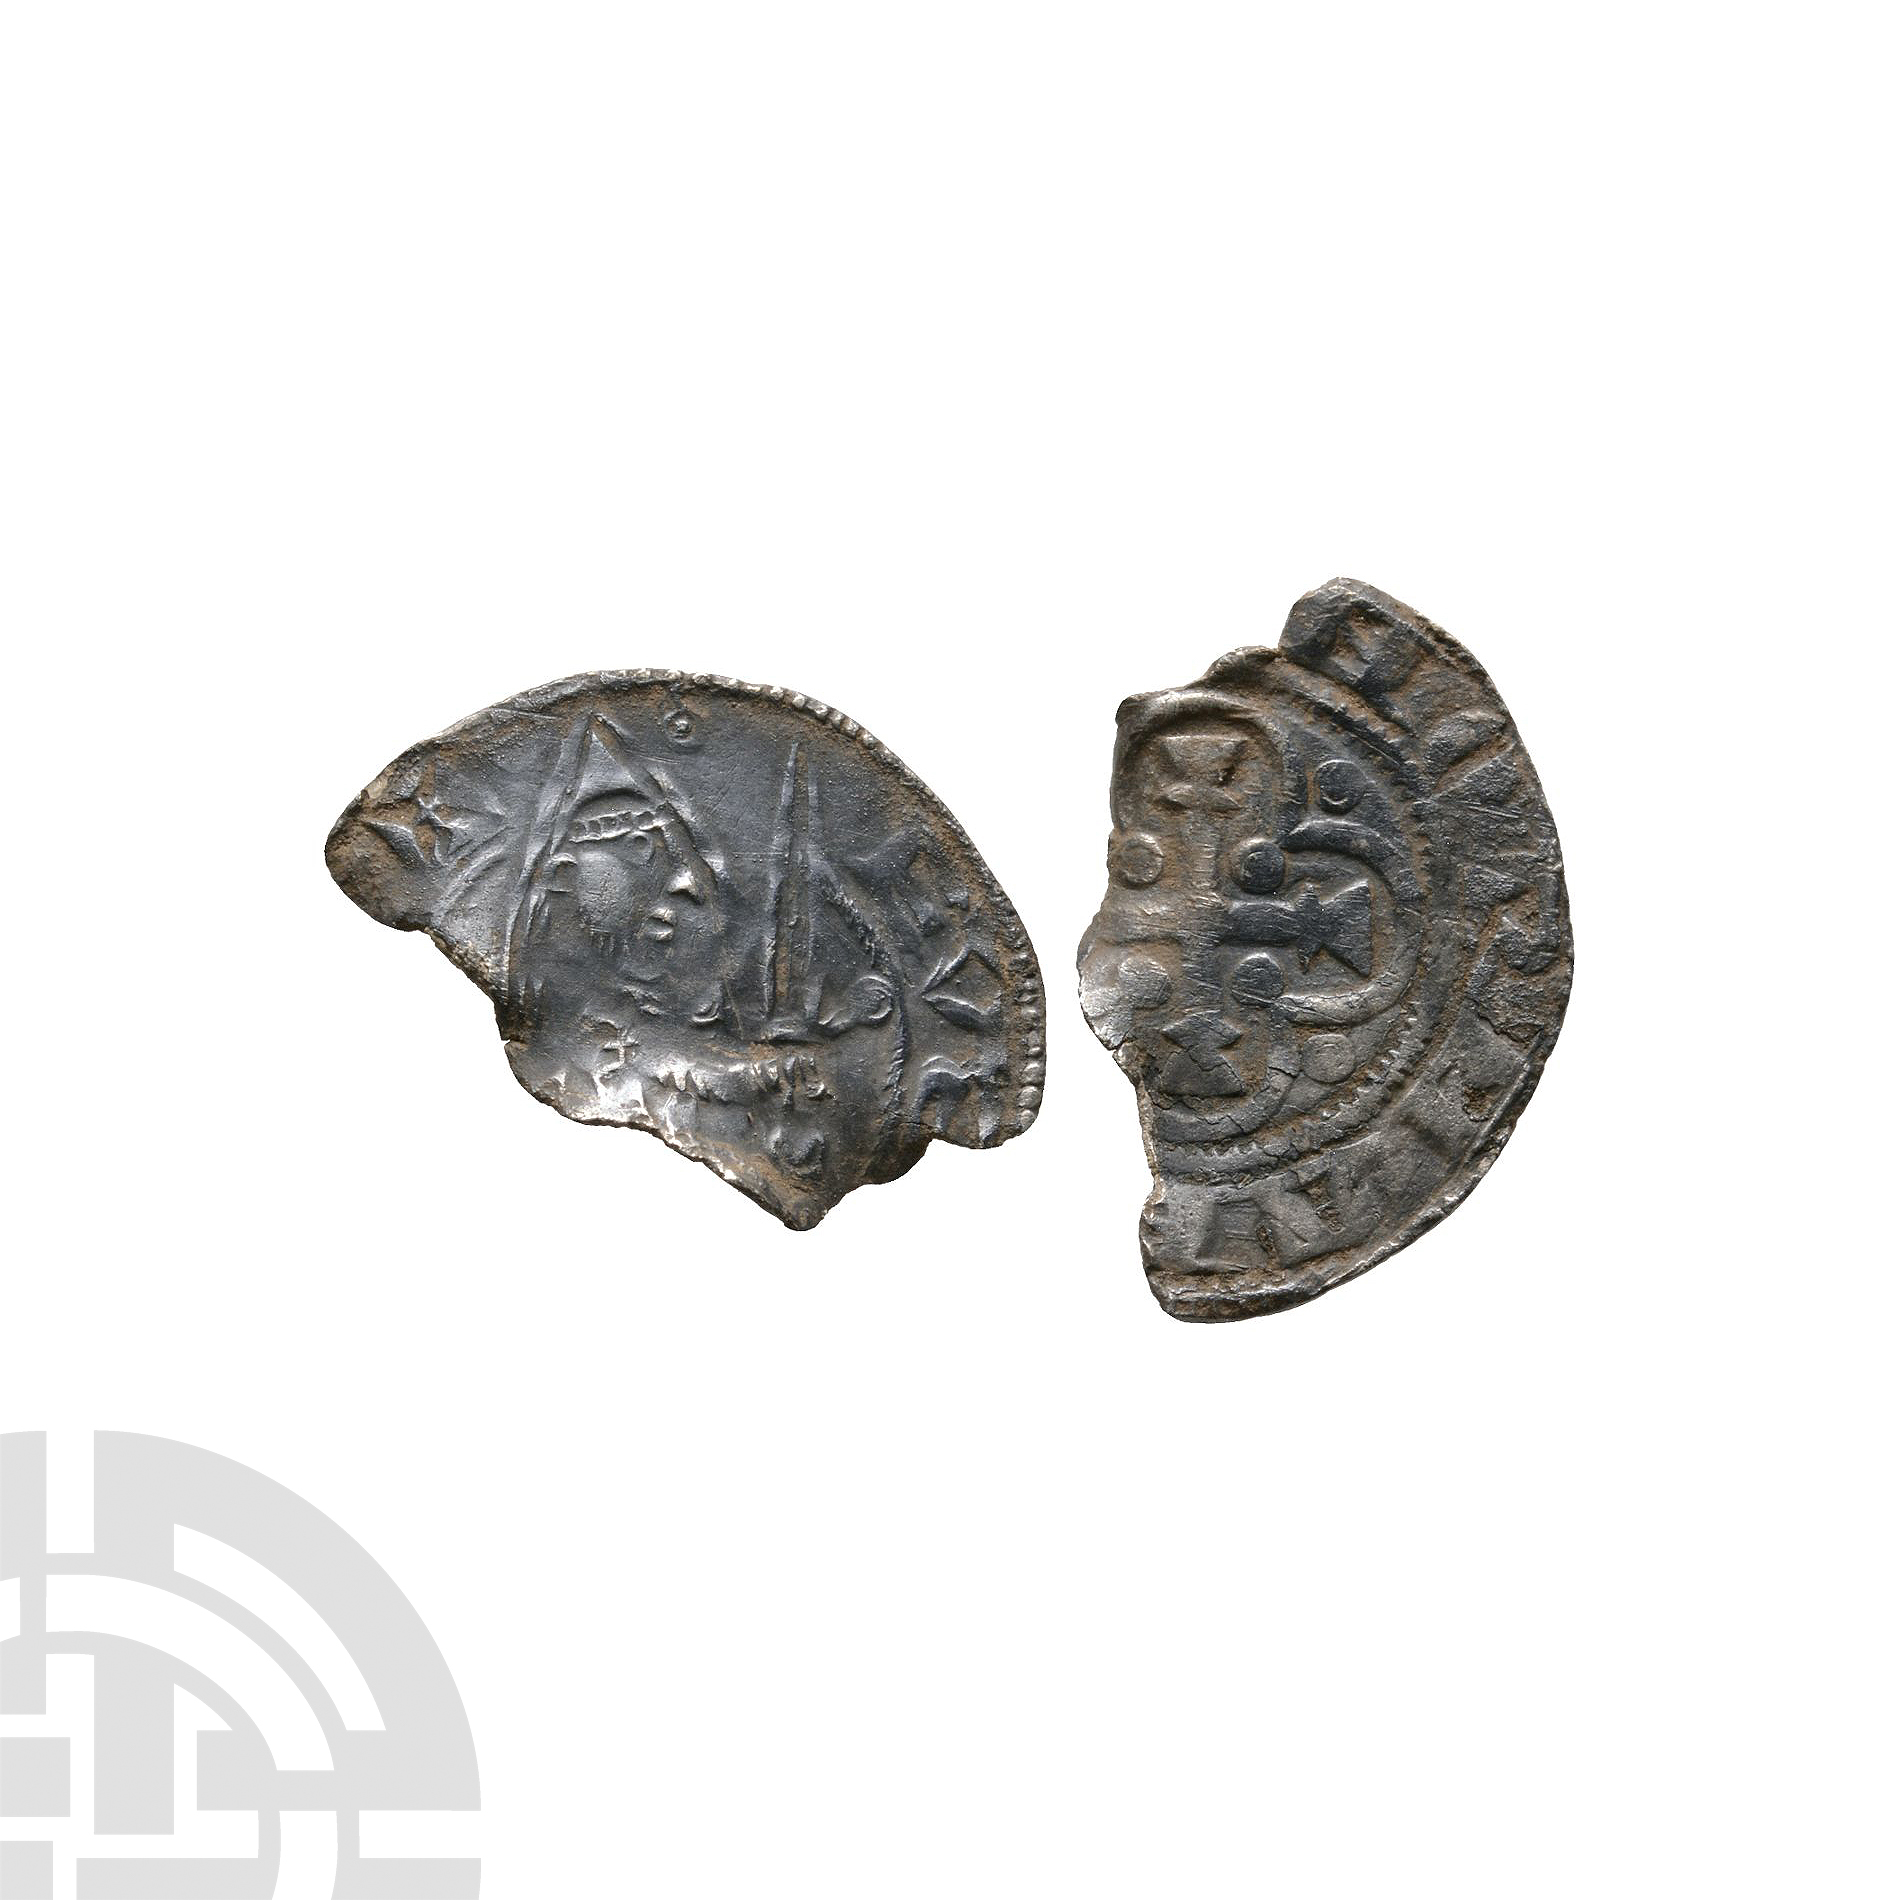 English Medieval Coins - Stephen and the Anarchy - Eustace Fitzjohn - AR Penny Fragment